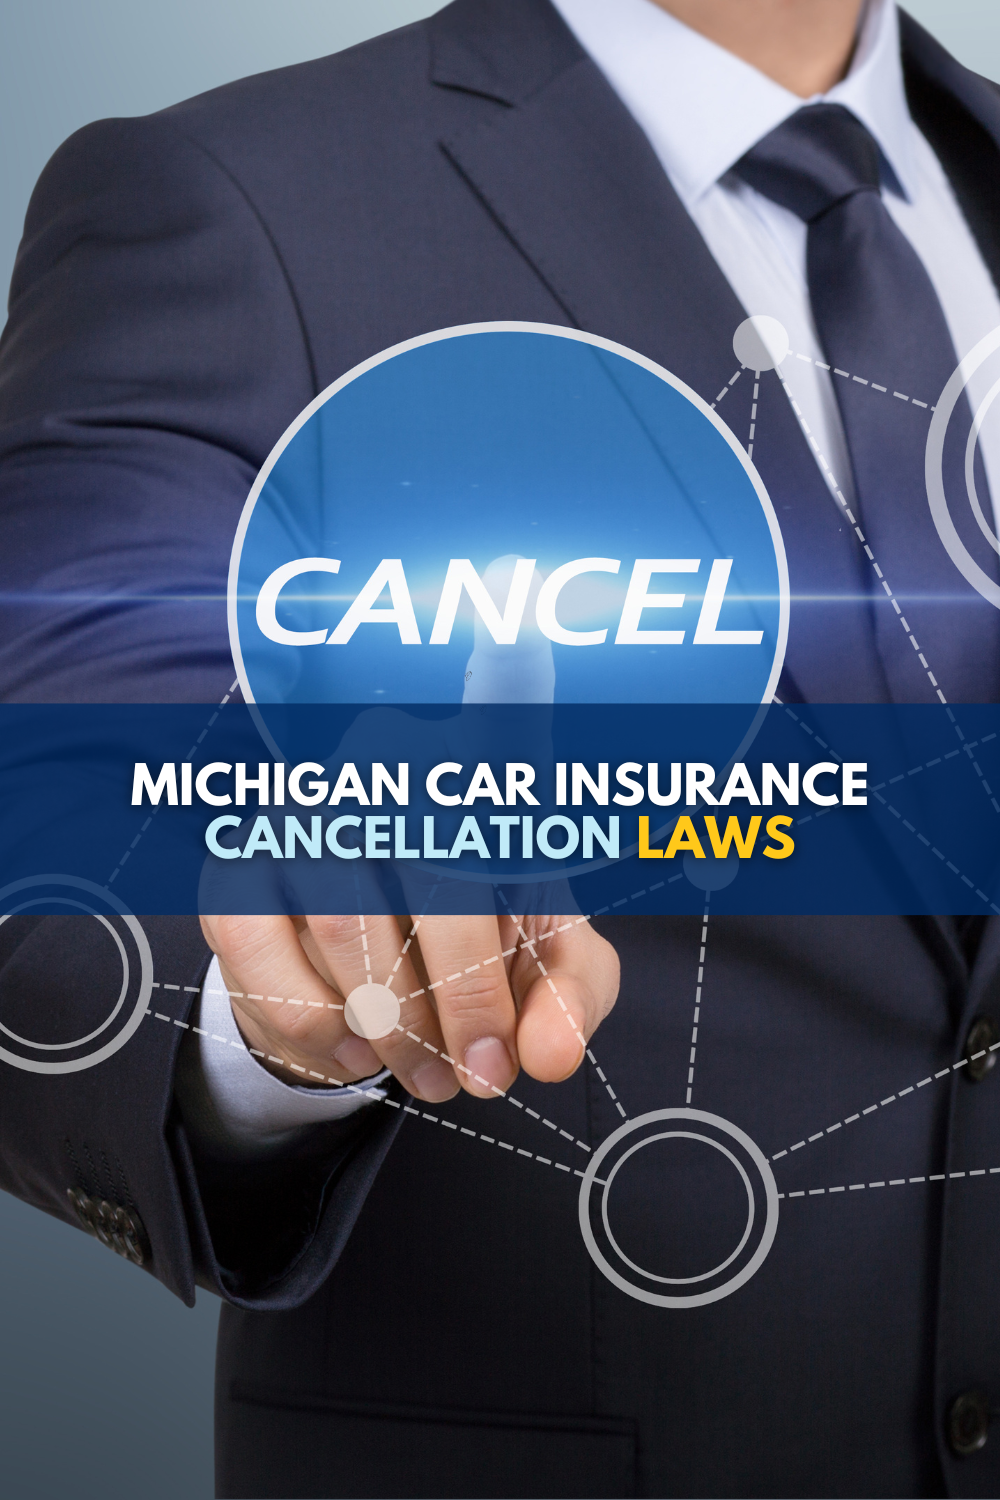 Michigan Car Insurance Cancellation Laws Explained